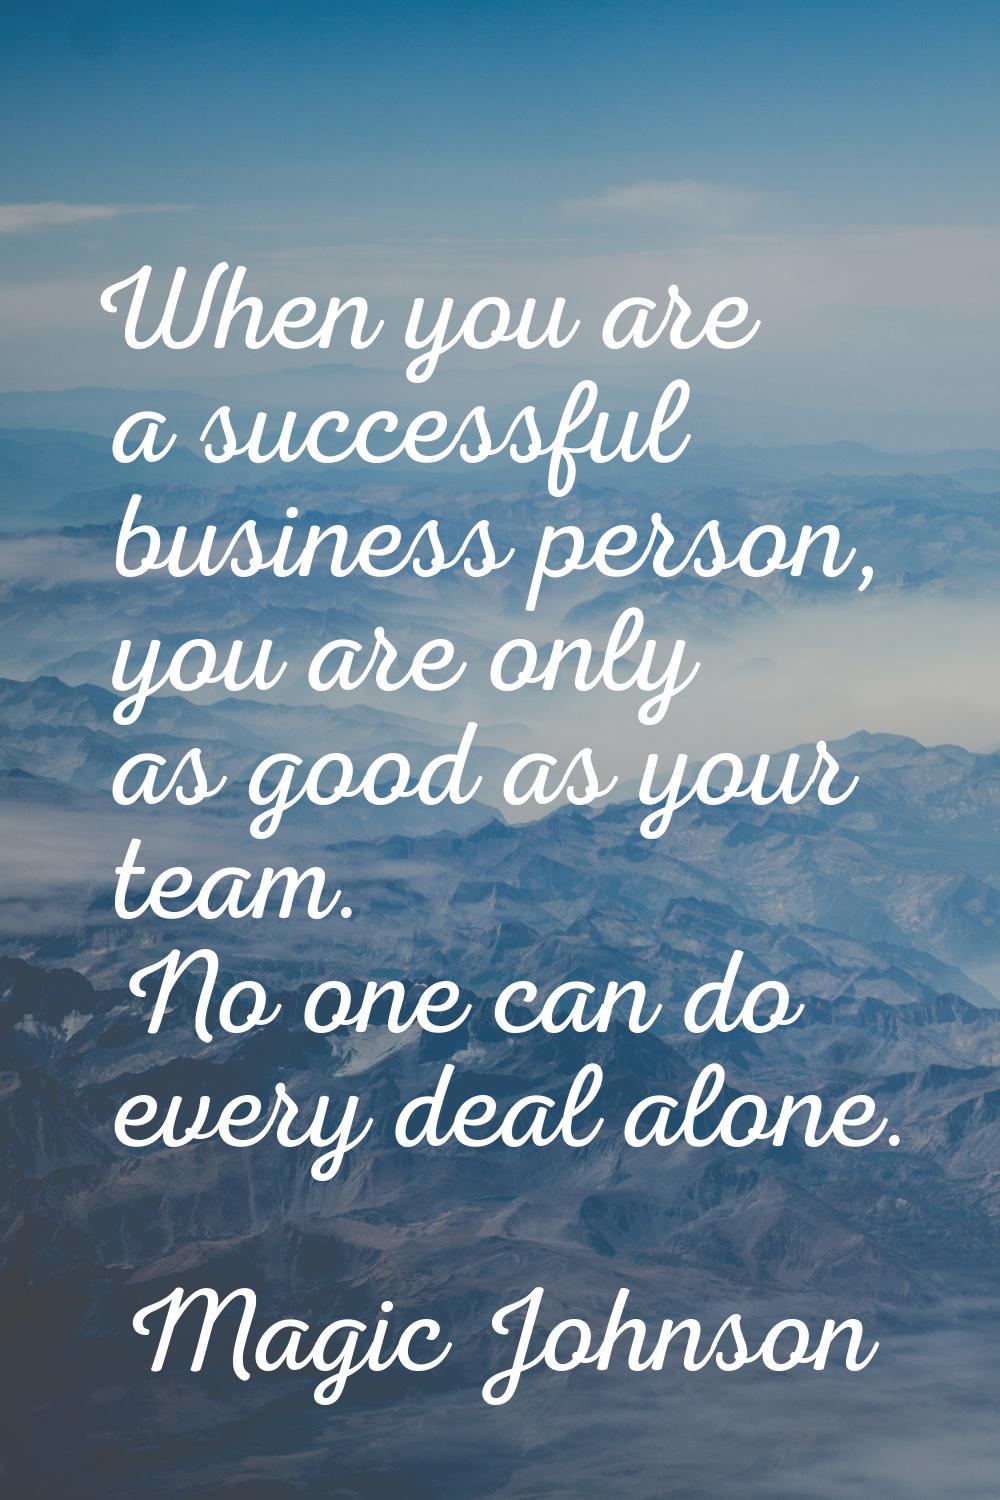 When you are a successful business person, you are only as good as your team. No one can do every d